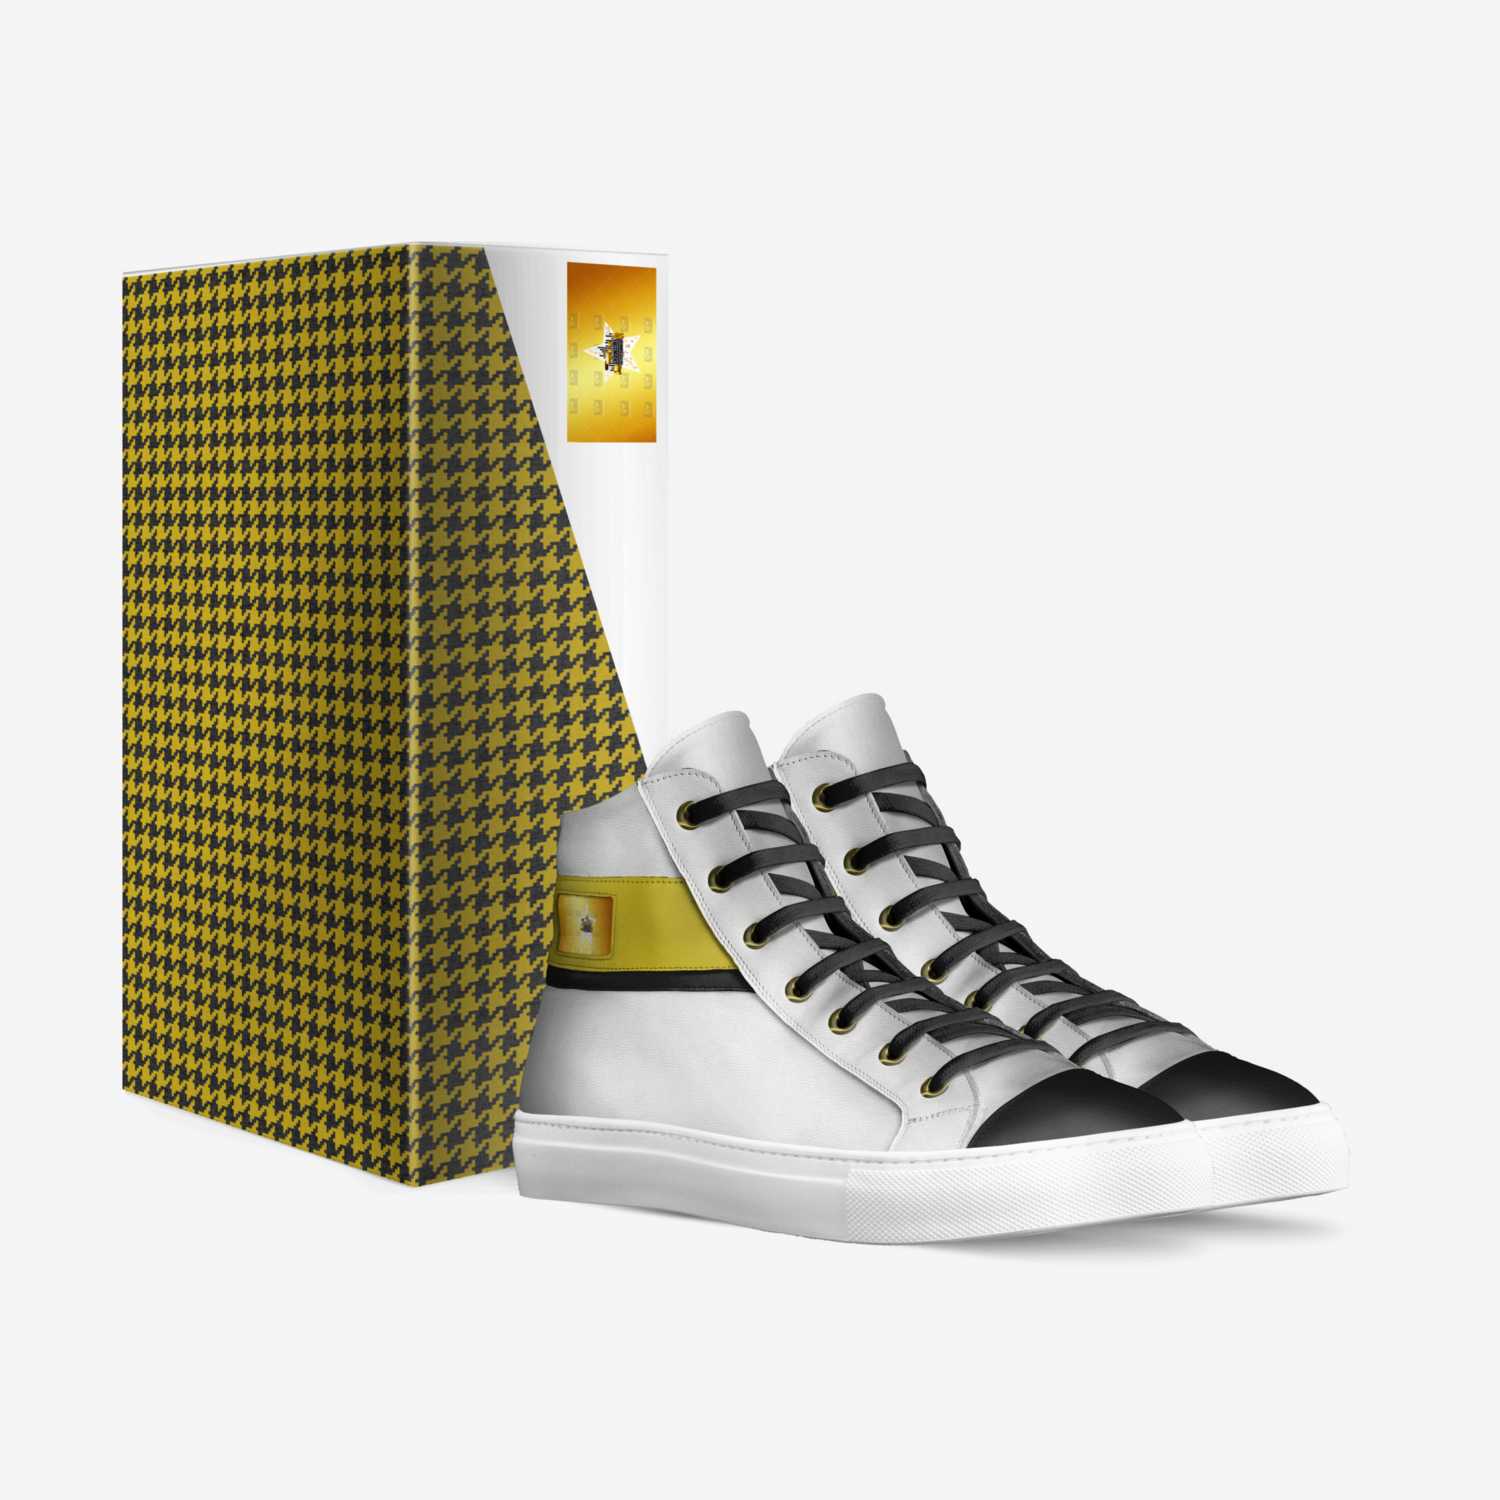 GC SERC10 custom made in Italy shoes by Le'Velle Lewis | Box view